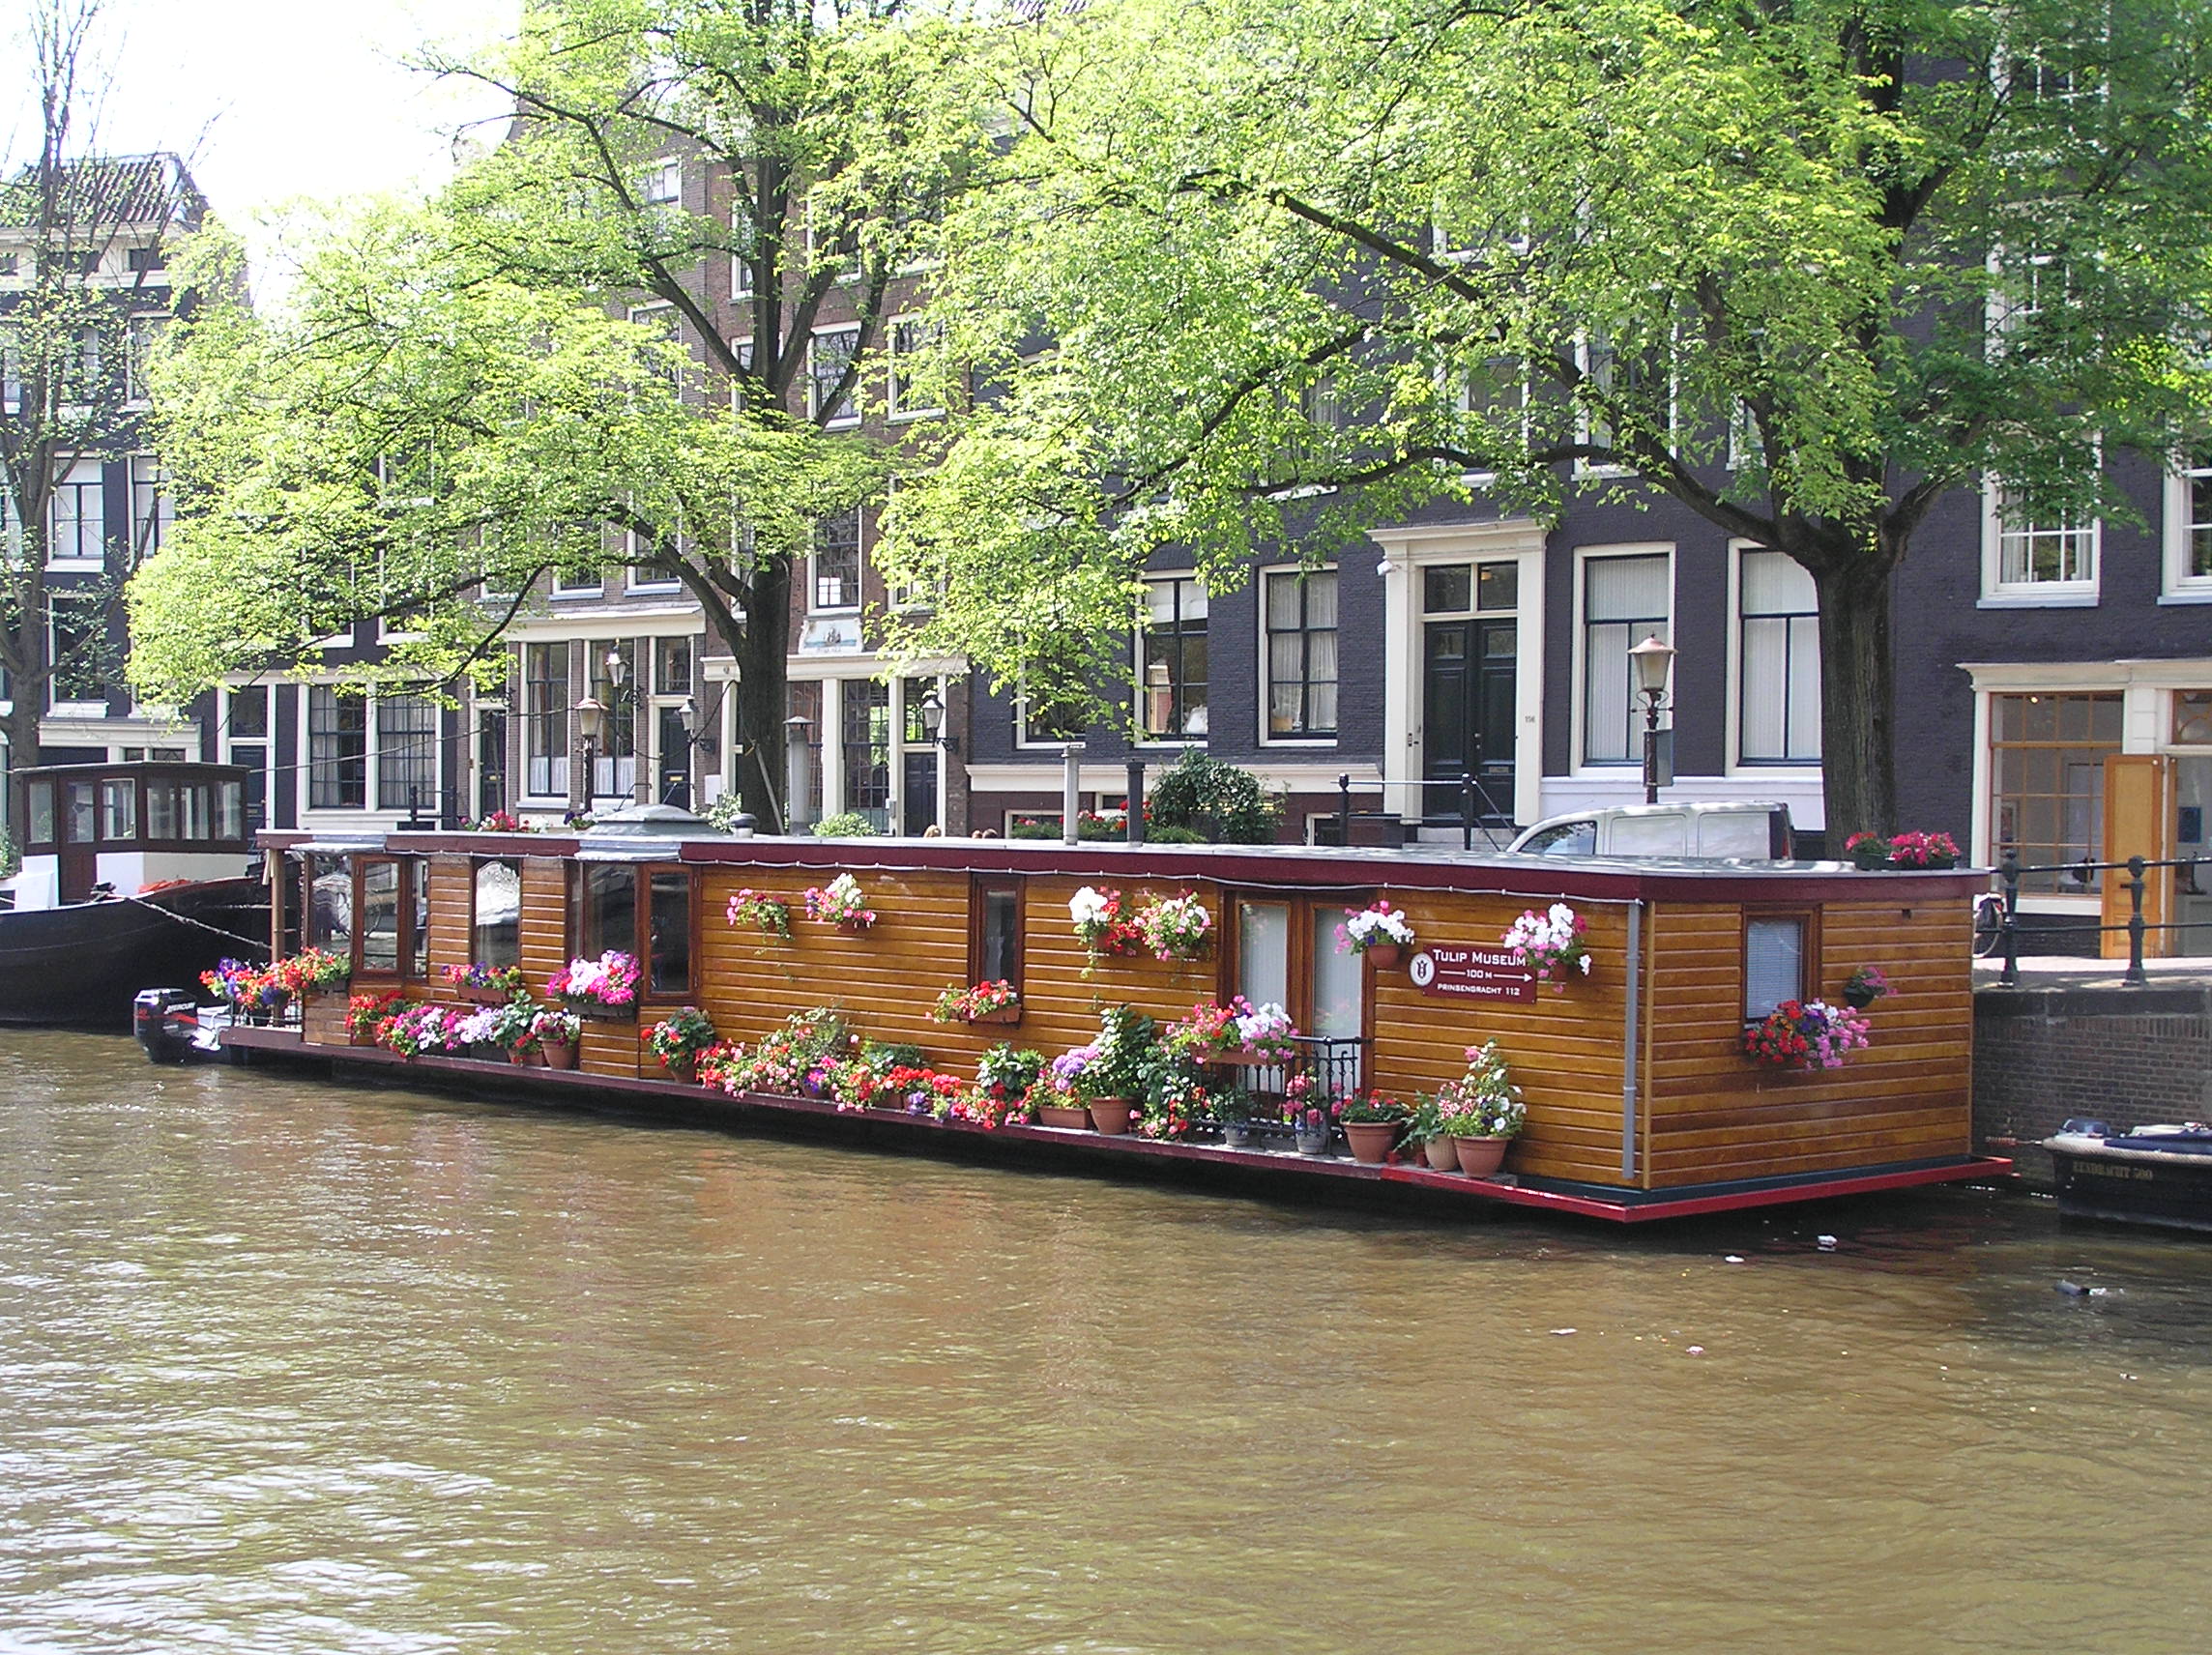 Riding the Canals of Amsterdam